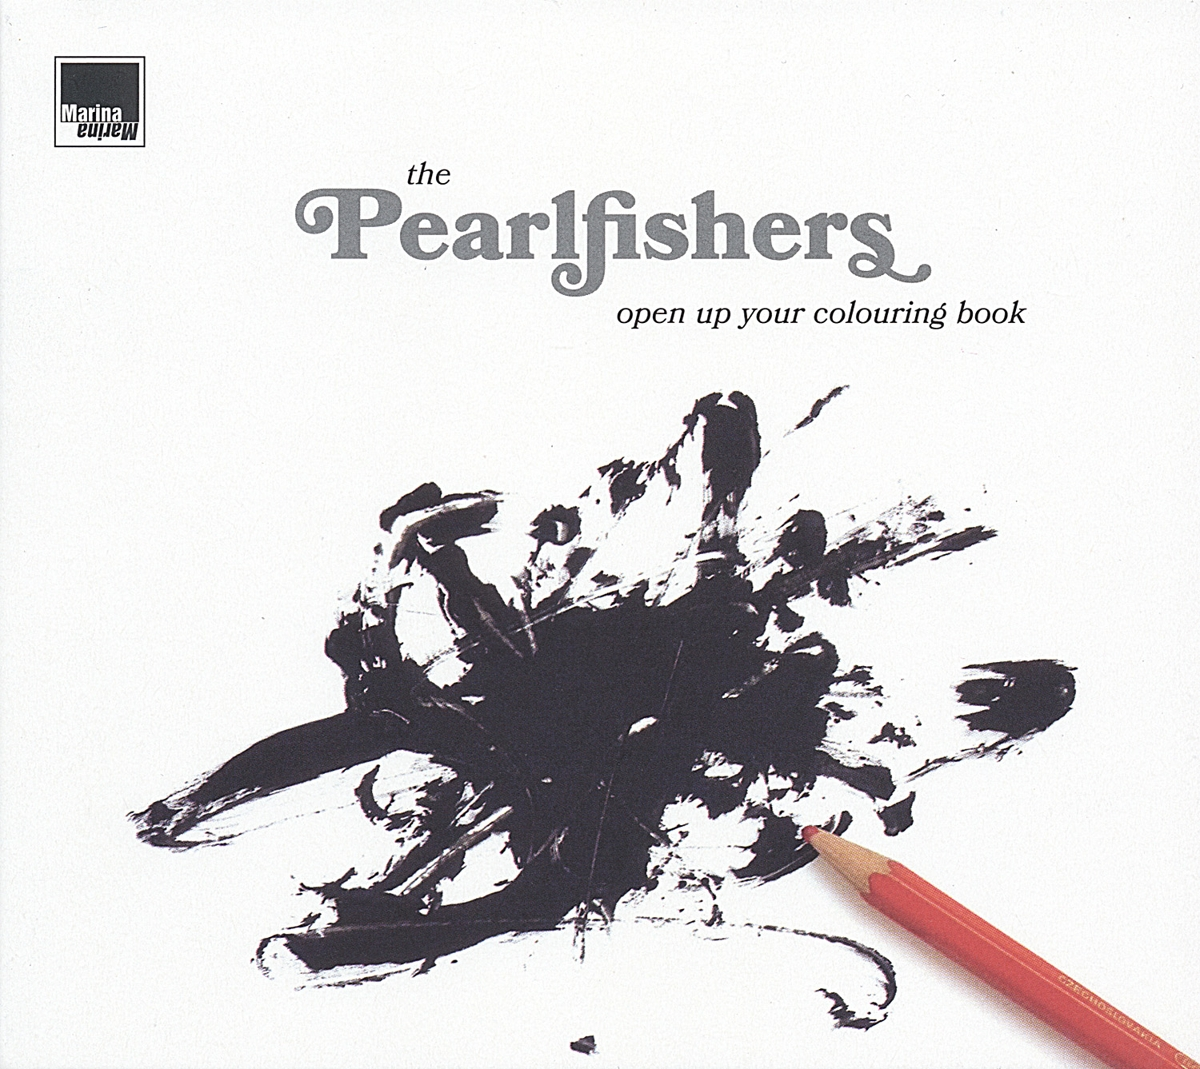 The Pearlfishers Book - Your (CD) - Up Colouring Open